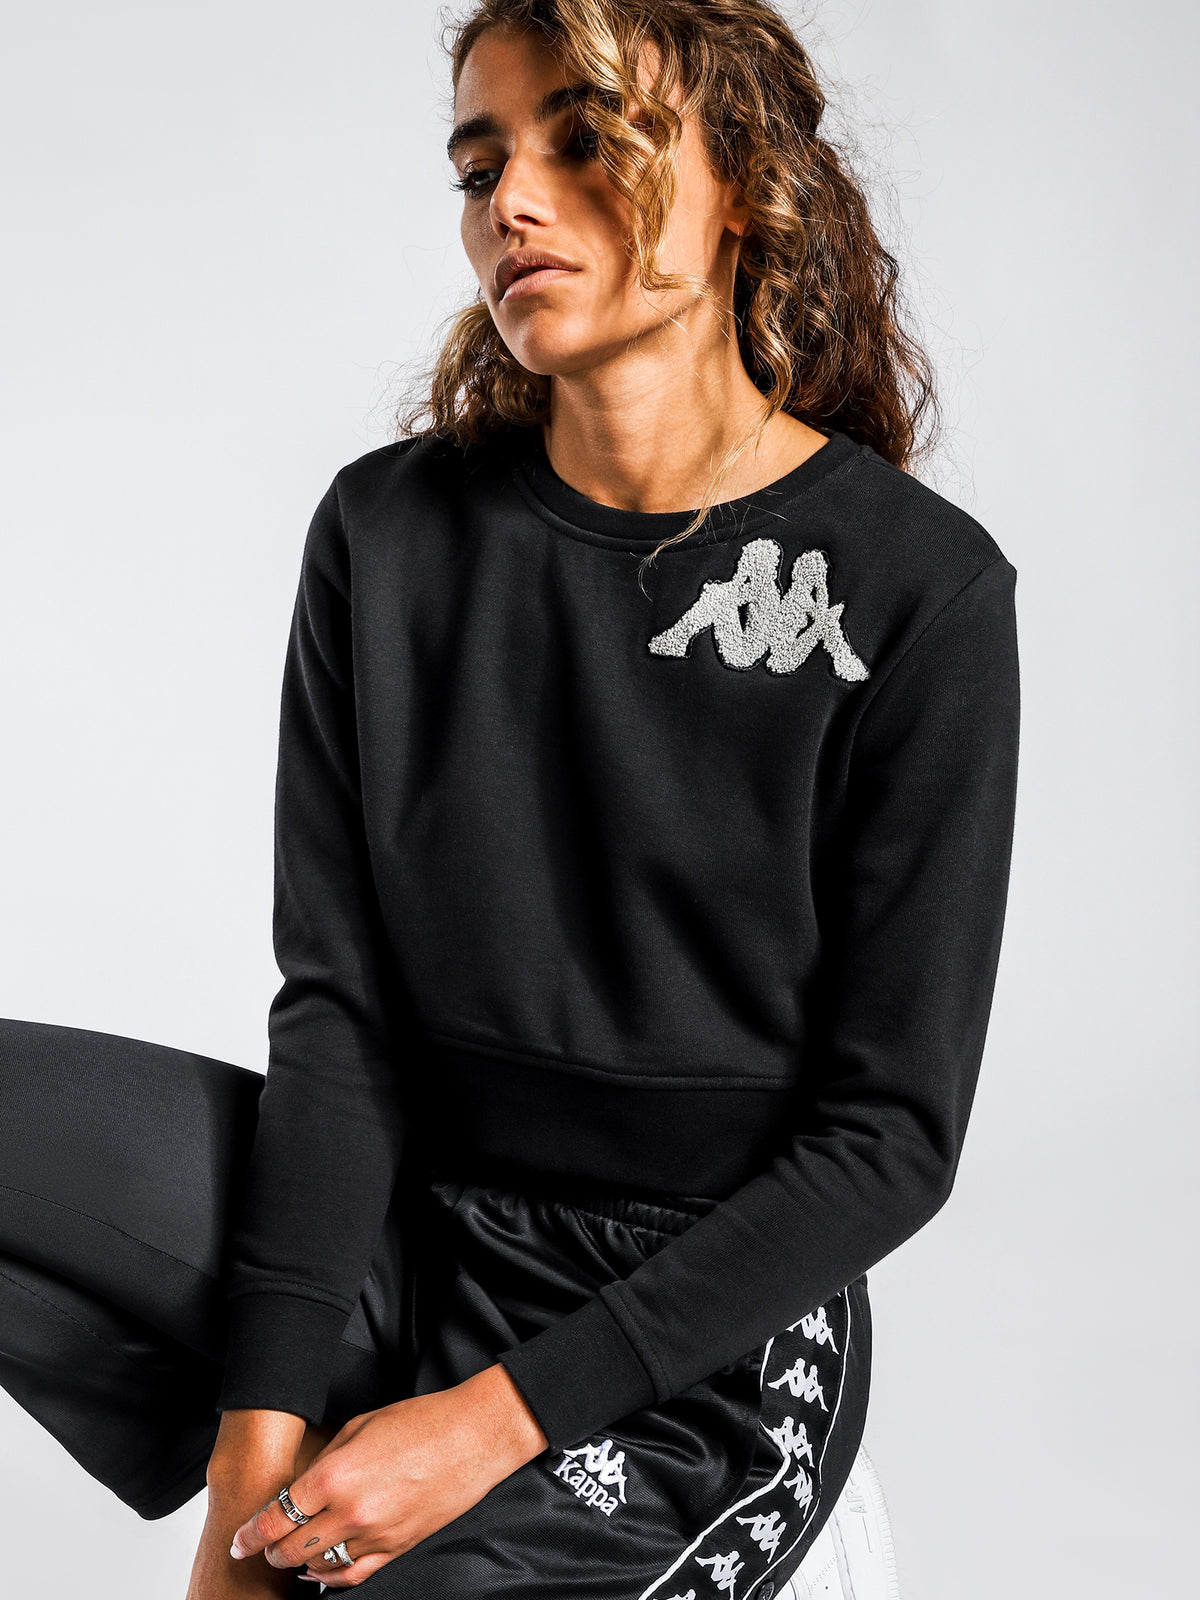 Authentic Bassy Cropped Jumper in Black